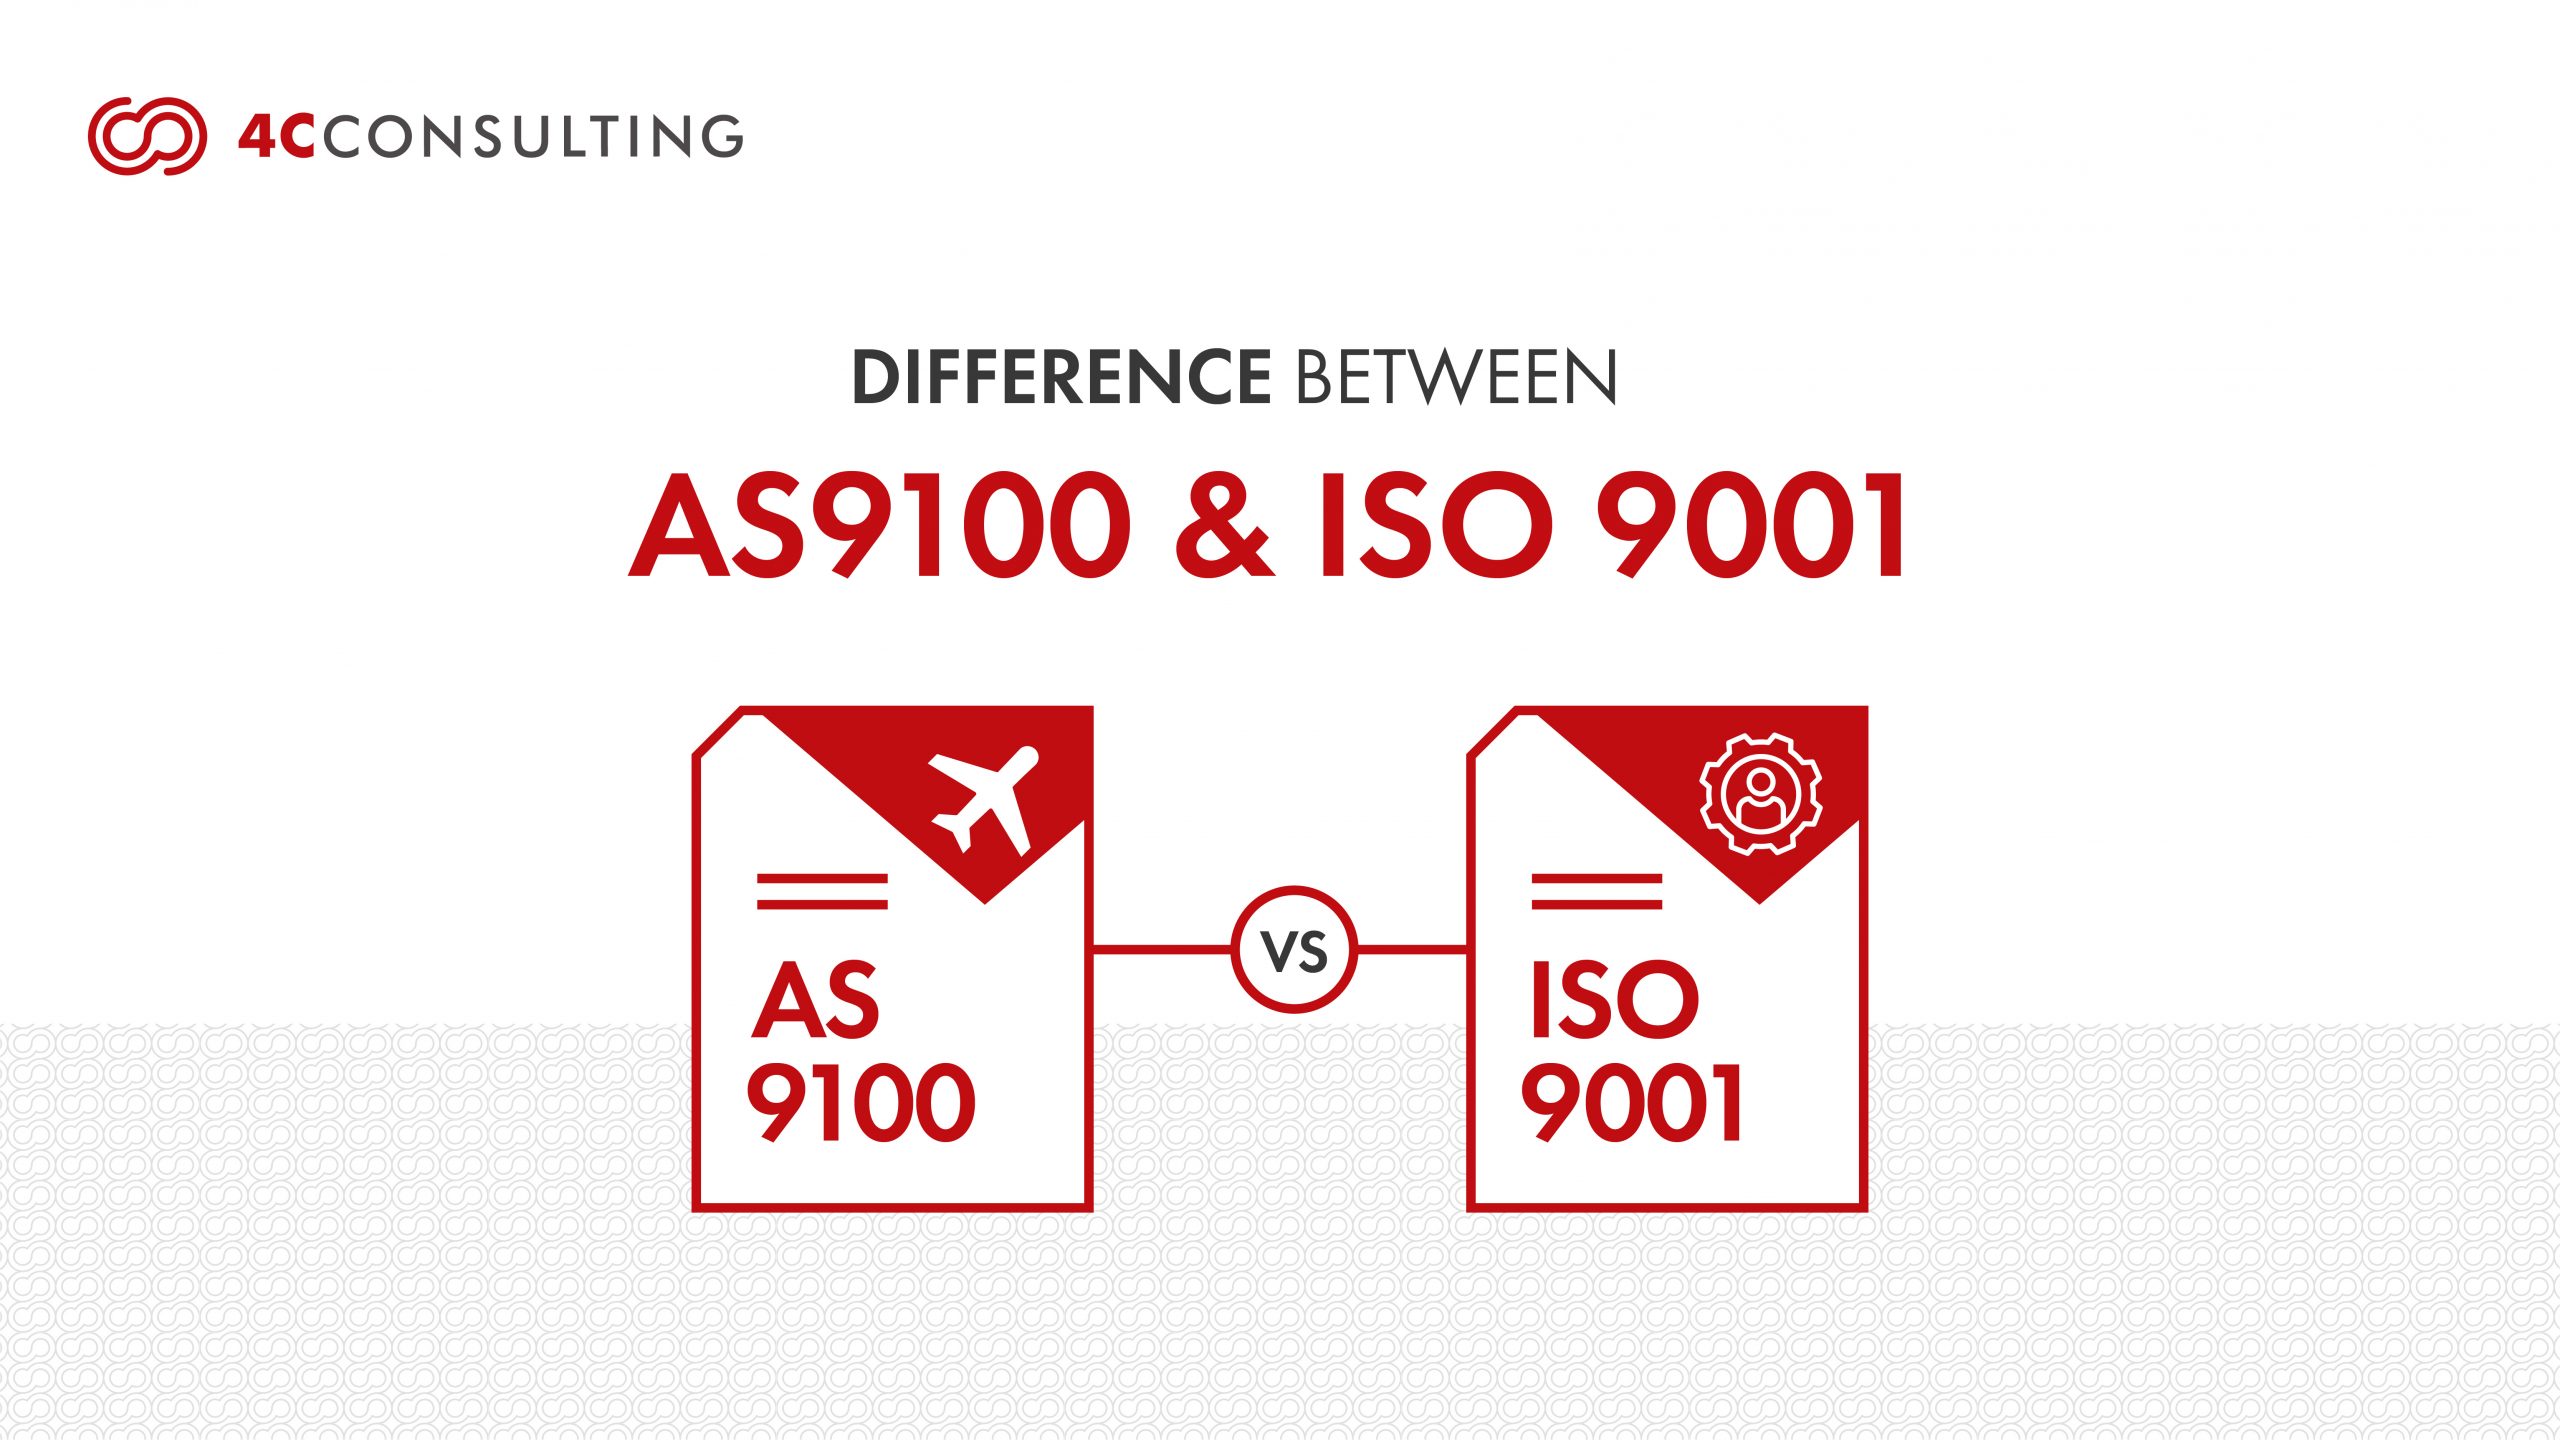 Differences Between ISO 9001 and AS9100 Standard